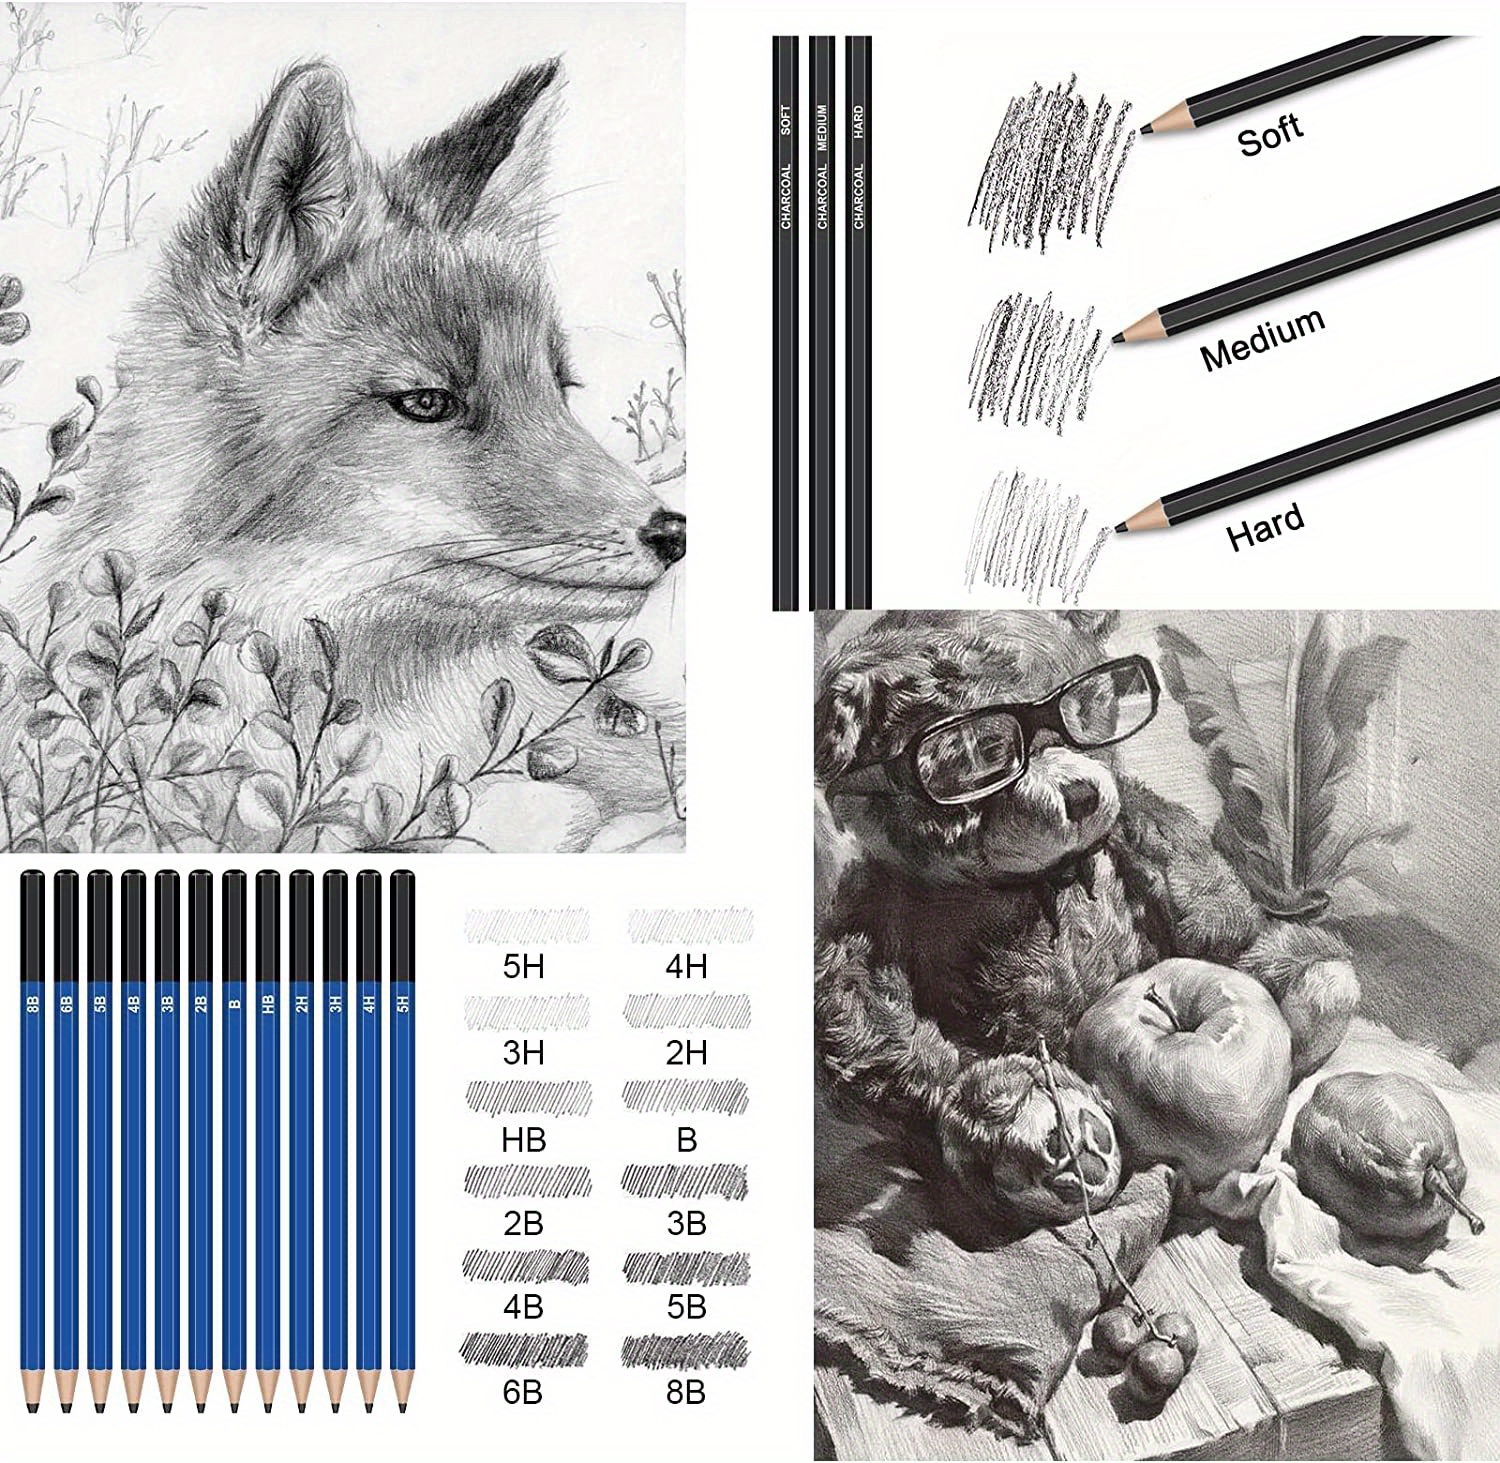 KALOUR 144 Pack Drawing Sketching Coloring Set,Include 120 Professional  Soft Core Colored Pencils,Sketch & Charcoal Pencils,Sketchbook,Art Drawing